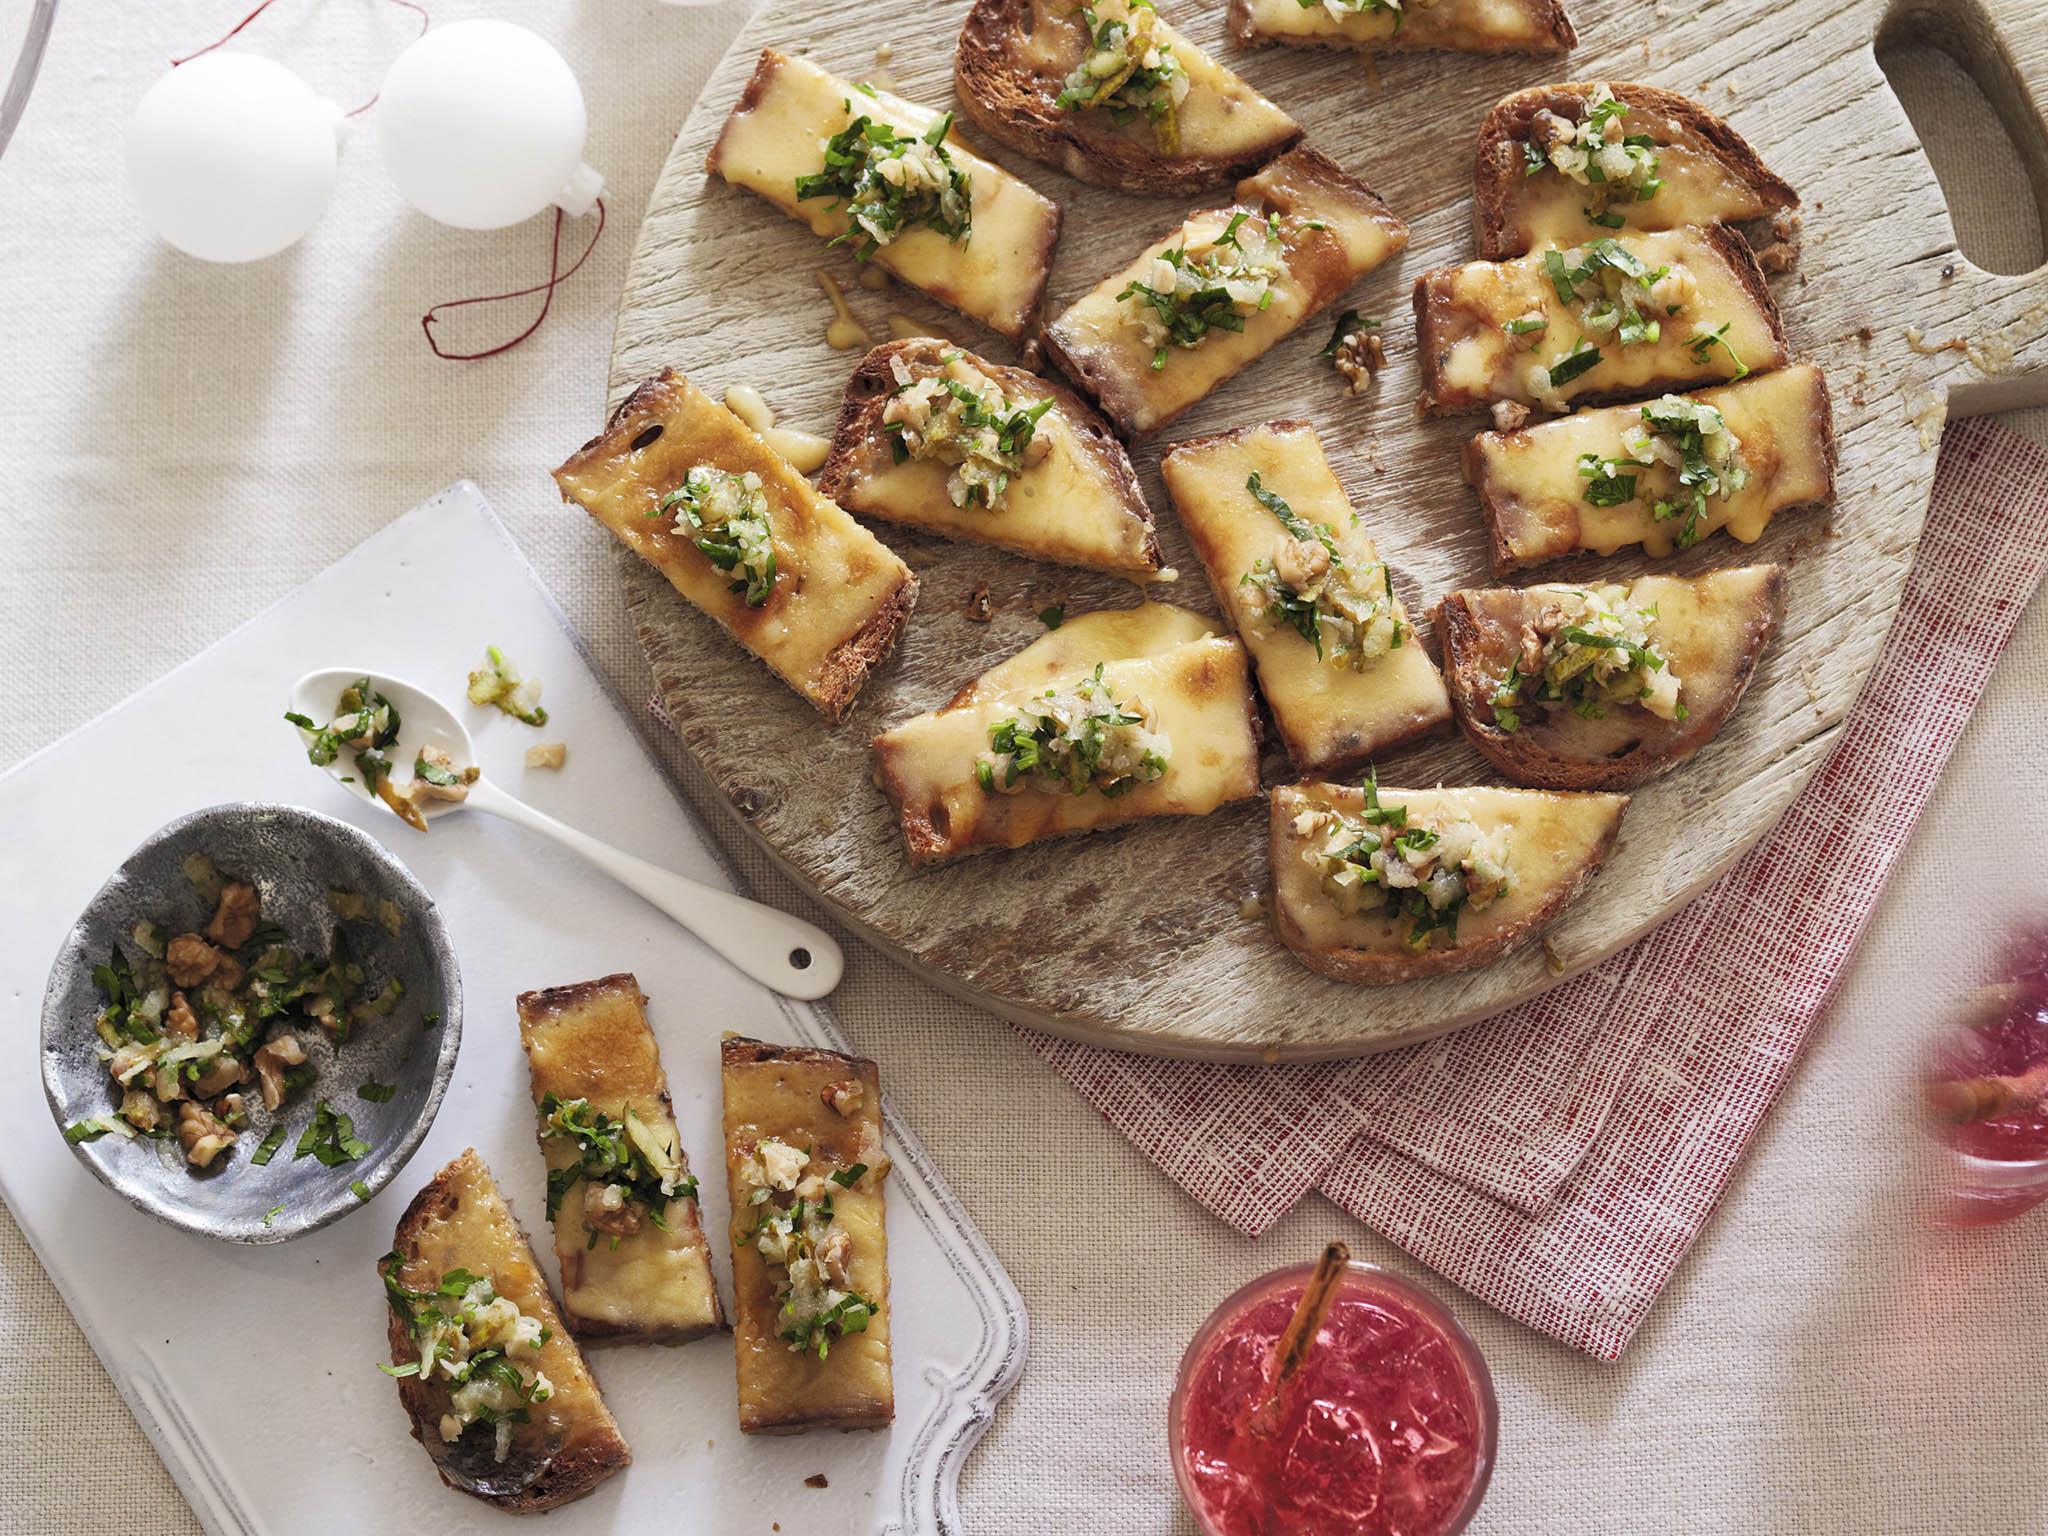 Classic rarebit is given a fresh twist with a topping of pear and walnut relish. Tidy!